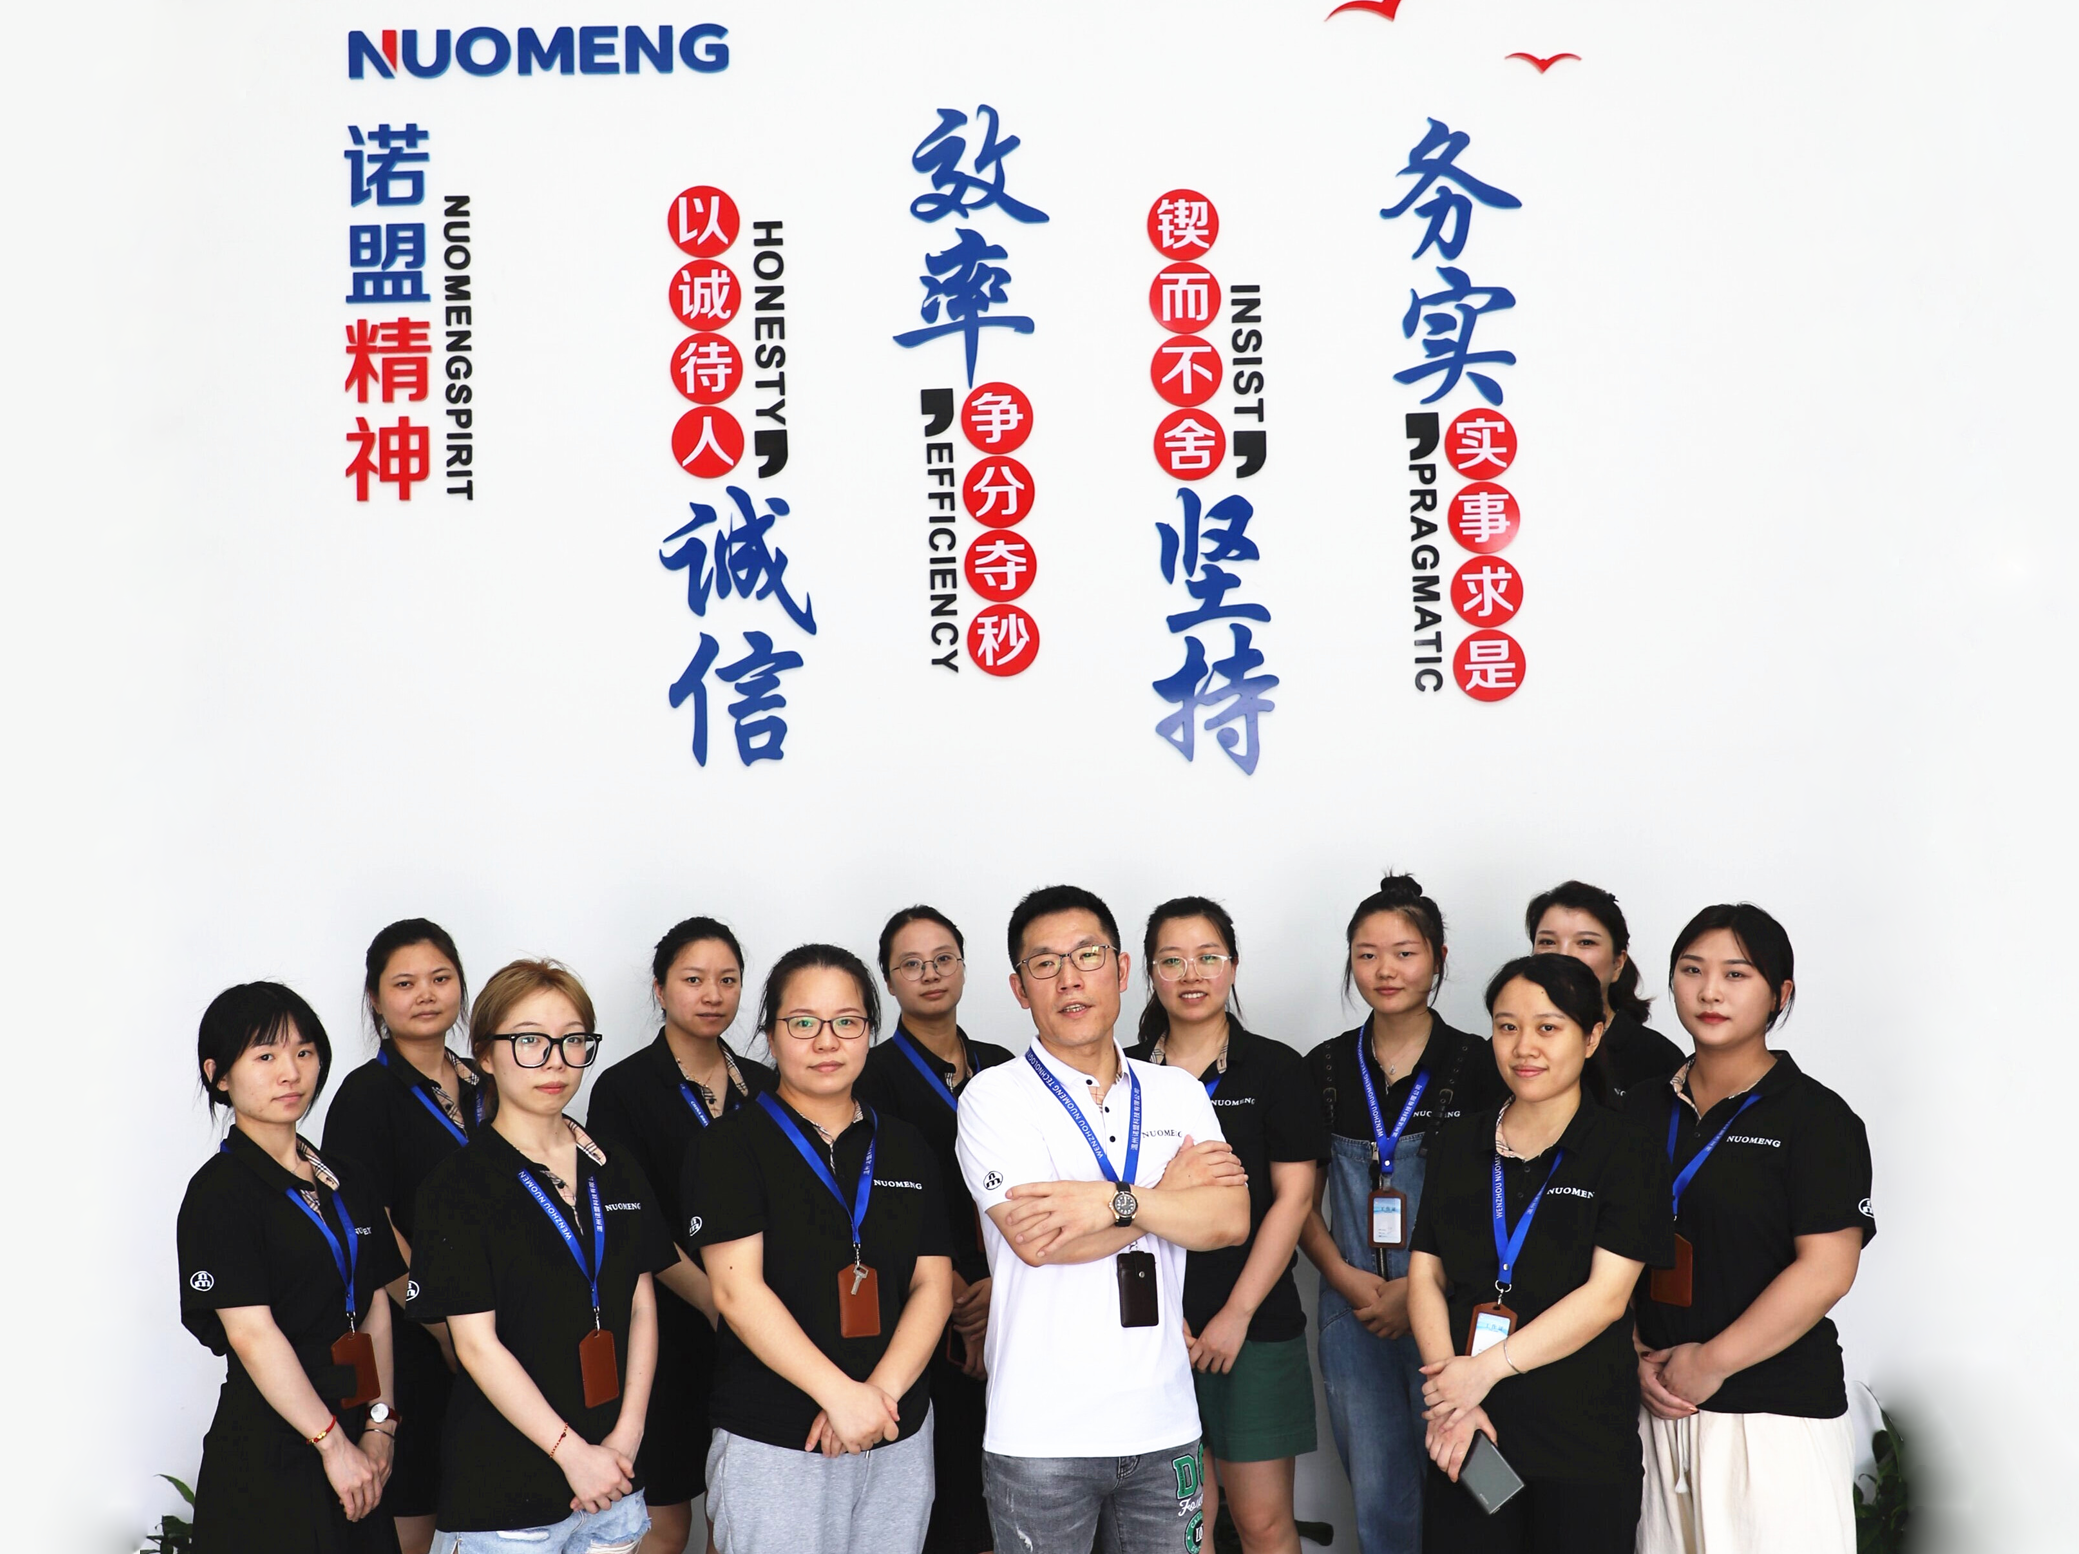 About Nuomeng